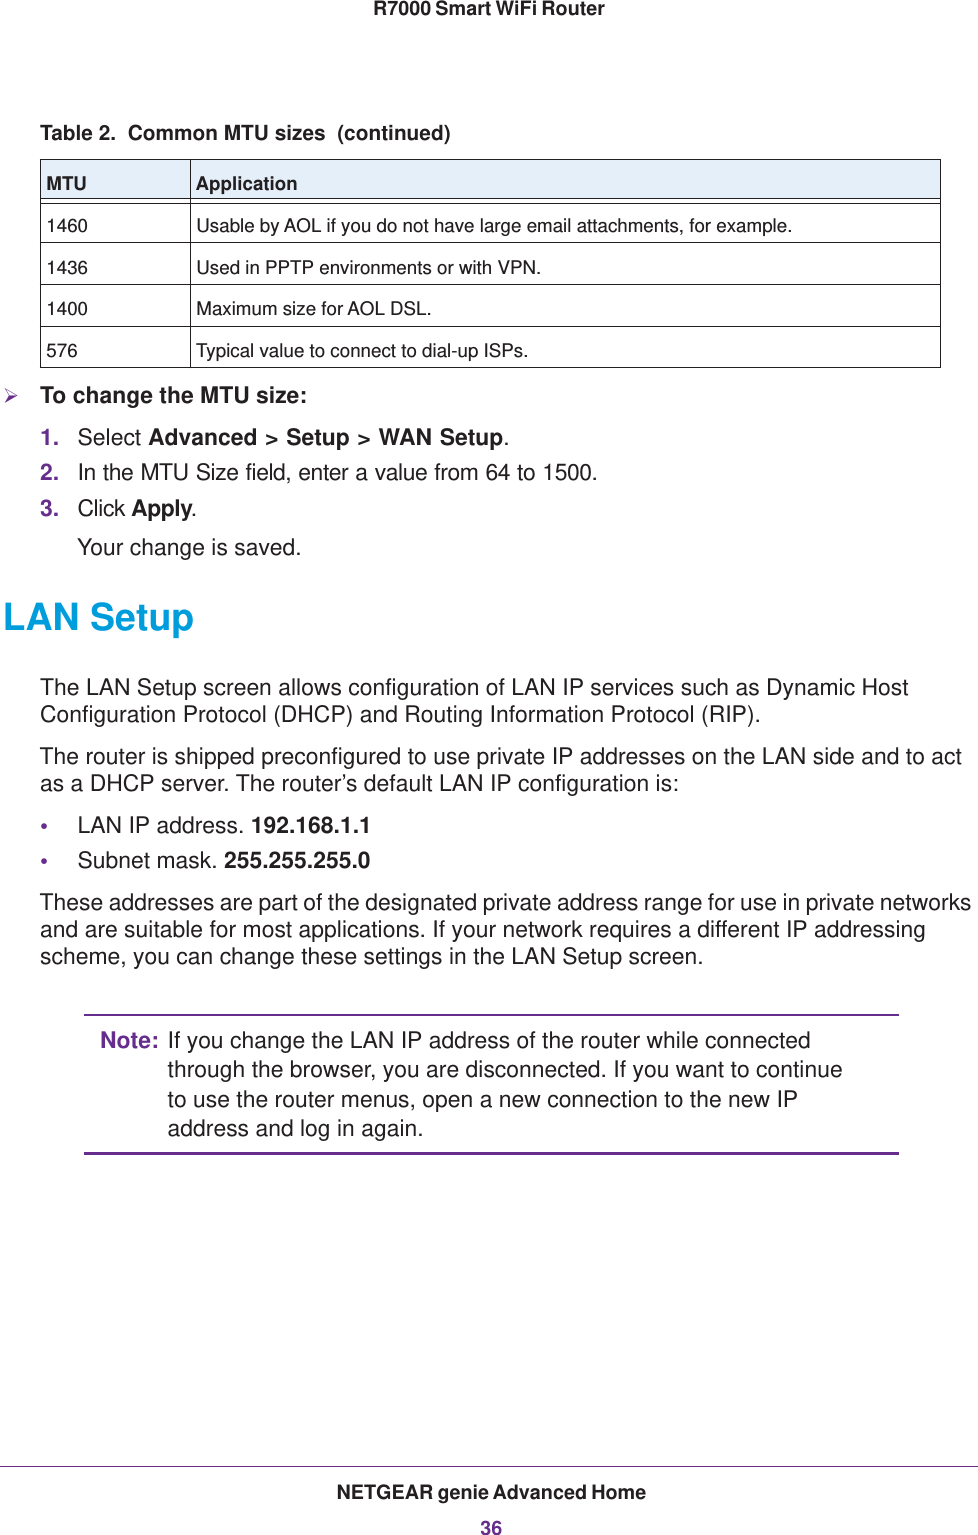 NETGEAR genie Advanced Home36R7000 Smart WiFi Router To change the MTU size:1. Select Advanced &gt; Setup &gt; WAN Setup. 2. In the MTU Size field, enter a value from 64 to 1500.3. Click Apply.Your change is saved.LAN SetupThe LAN Setup screen allows configuration of LAN IP services such as Dynamic Host Configuration Protocol (DHCP) and Routing Information Protocol (RIP).The router is shipped preconfigured to use private IP addresses on the LAN side and to act as a DHCP server. The router’s default LAN IP configuration is:•LAN IP address. 192.168.1.1•Subnet mask. 255.255.255.0These addresses are part of the designated private address range for use in private networks and are suitable for most applications. If your network requires a different IP addressing scheme, you can change these settings in the LAN Setup screen.Note: If you change the LAN IP address of the router while connected through the browser, you are disconnected. If you want to continue to use the router menus, open a new connection to the new IP address and log in again.1460 Usable by AOL if you do not have large email attachments, for example.1436 Used in PPTP environments or with VPN.1400 Maximum size for AOL DSL.576 Typical value to connect to dial-up ISPs.Table 2.  Common MTU sizes  (continued)MTU Application